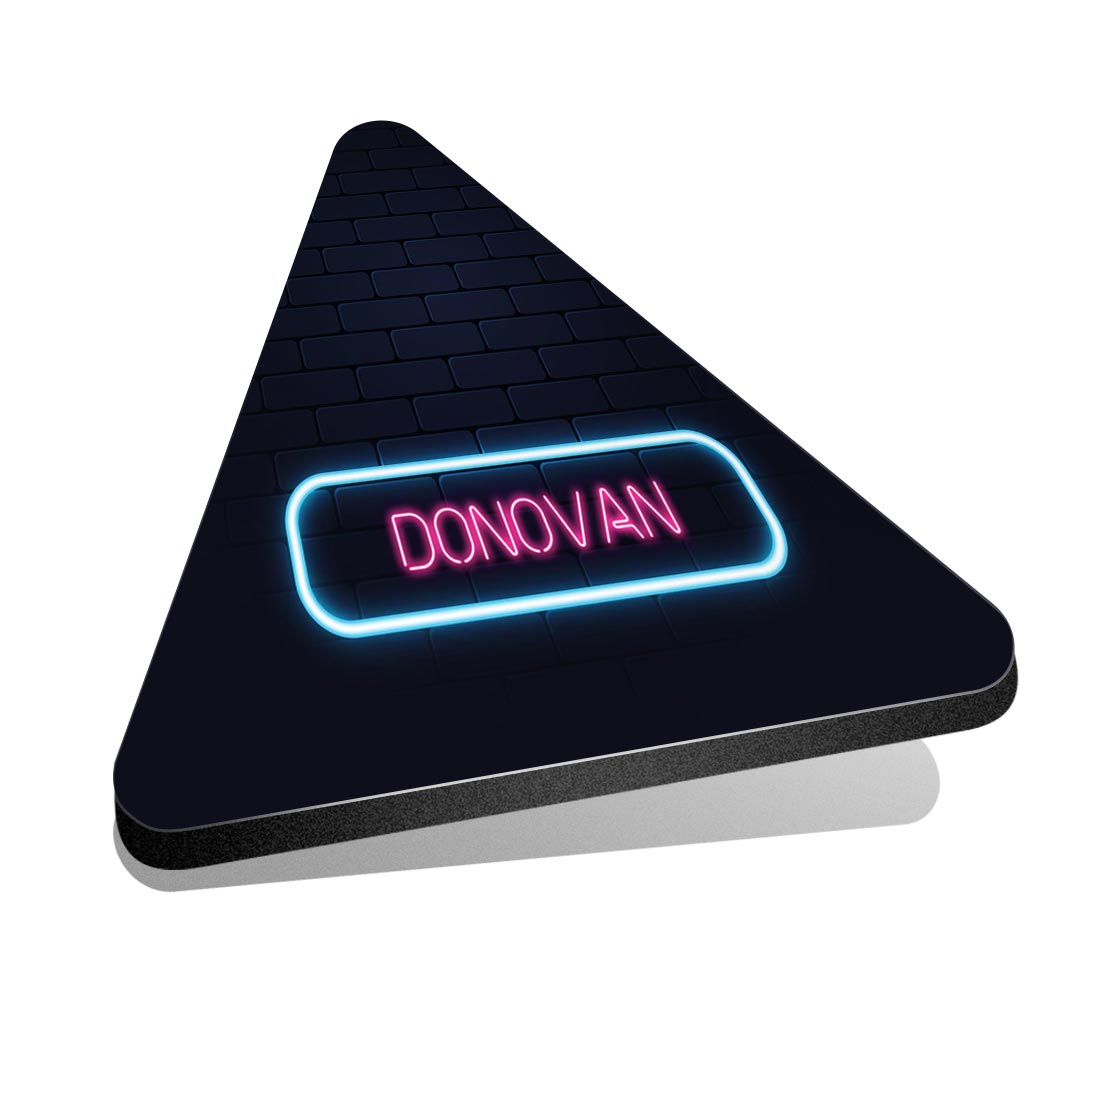 1x Triangle Fridge MDF Magnet Neon Sign Design Donovan Name #351858 - Picture 1 of 1